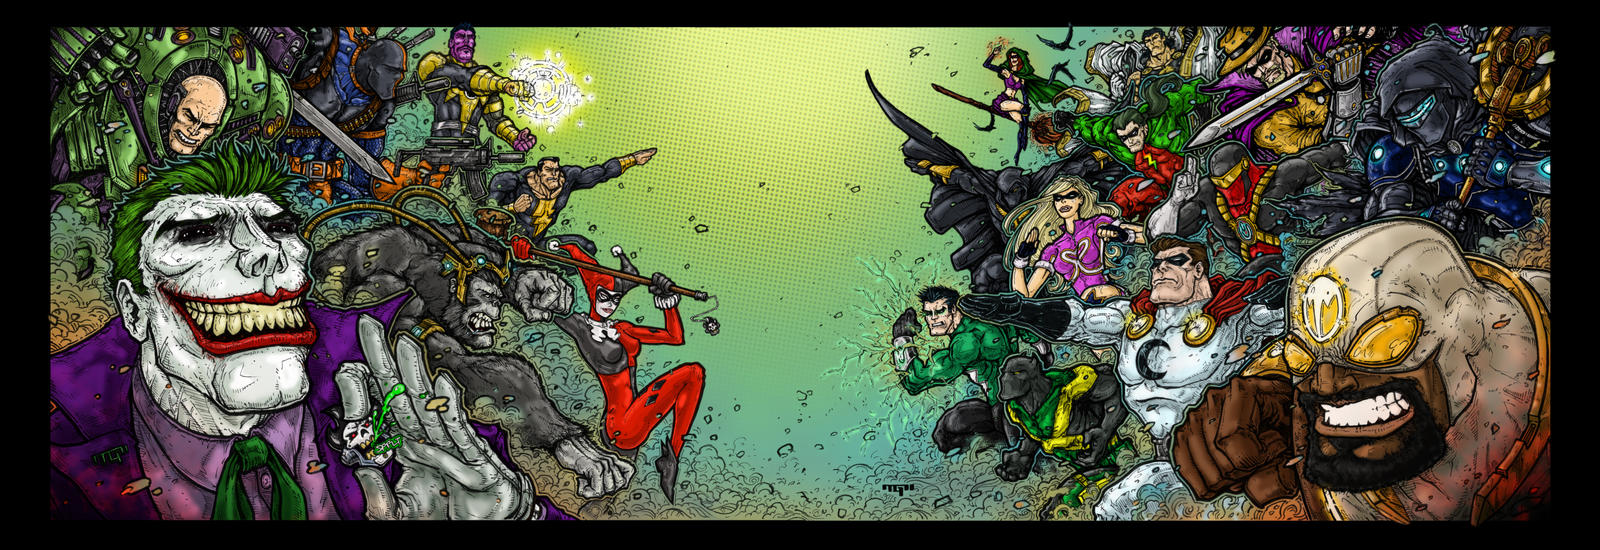 peacekeepers_vs__dc_villains__by_taylorg